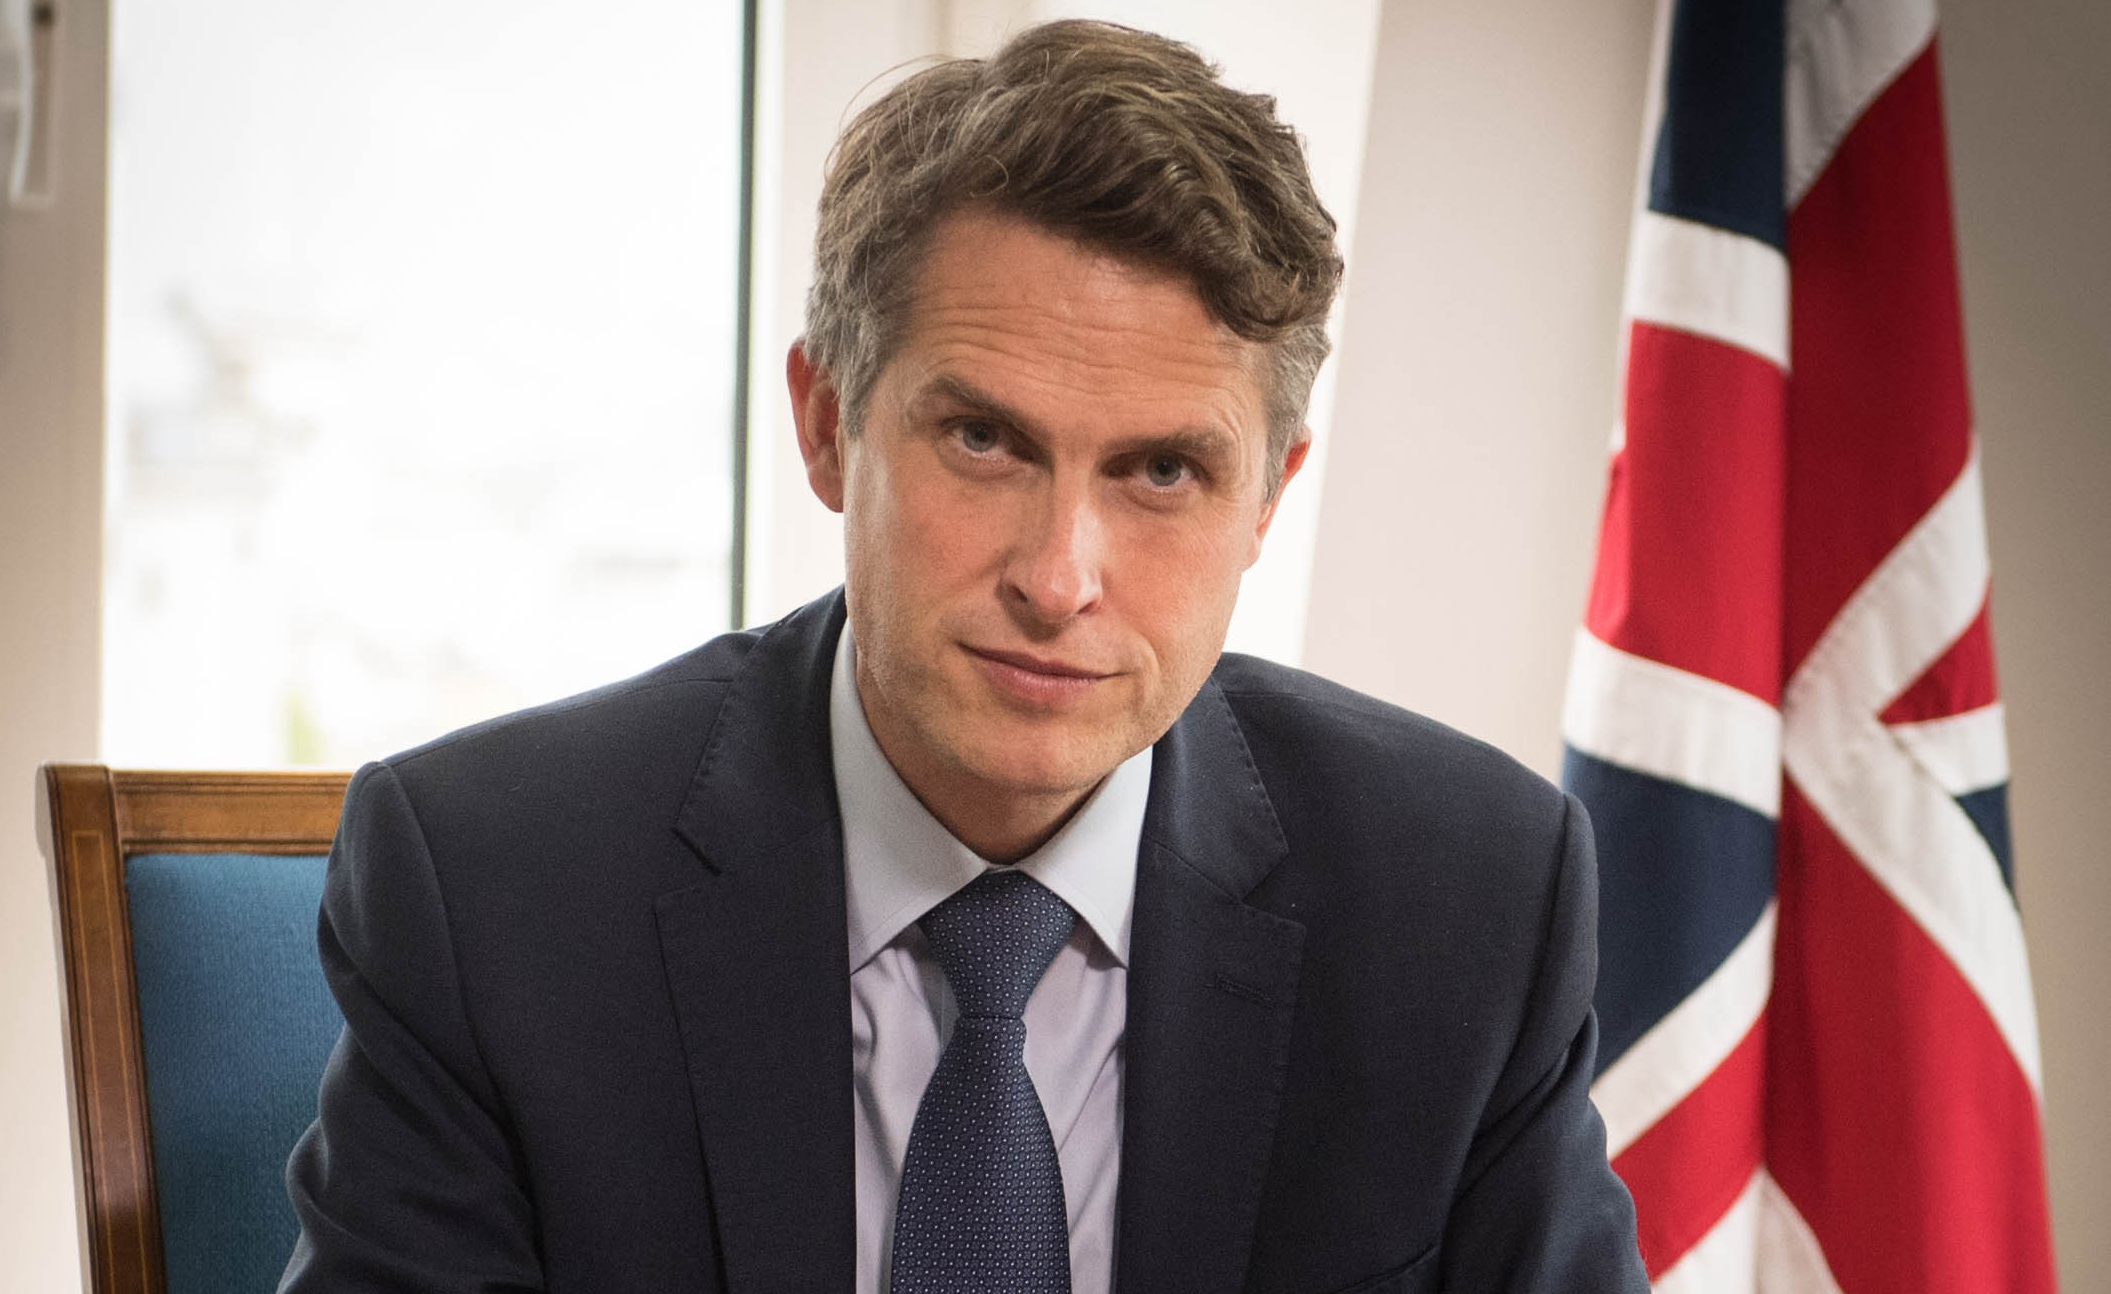 ‘They’re mocking us’: Gavin Williamson knighted